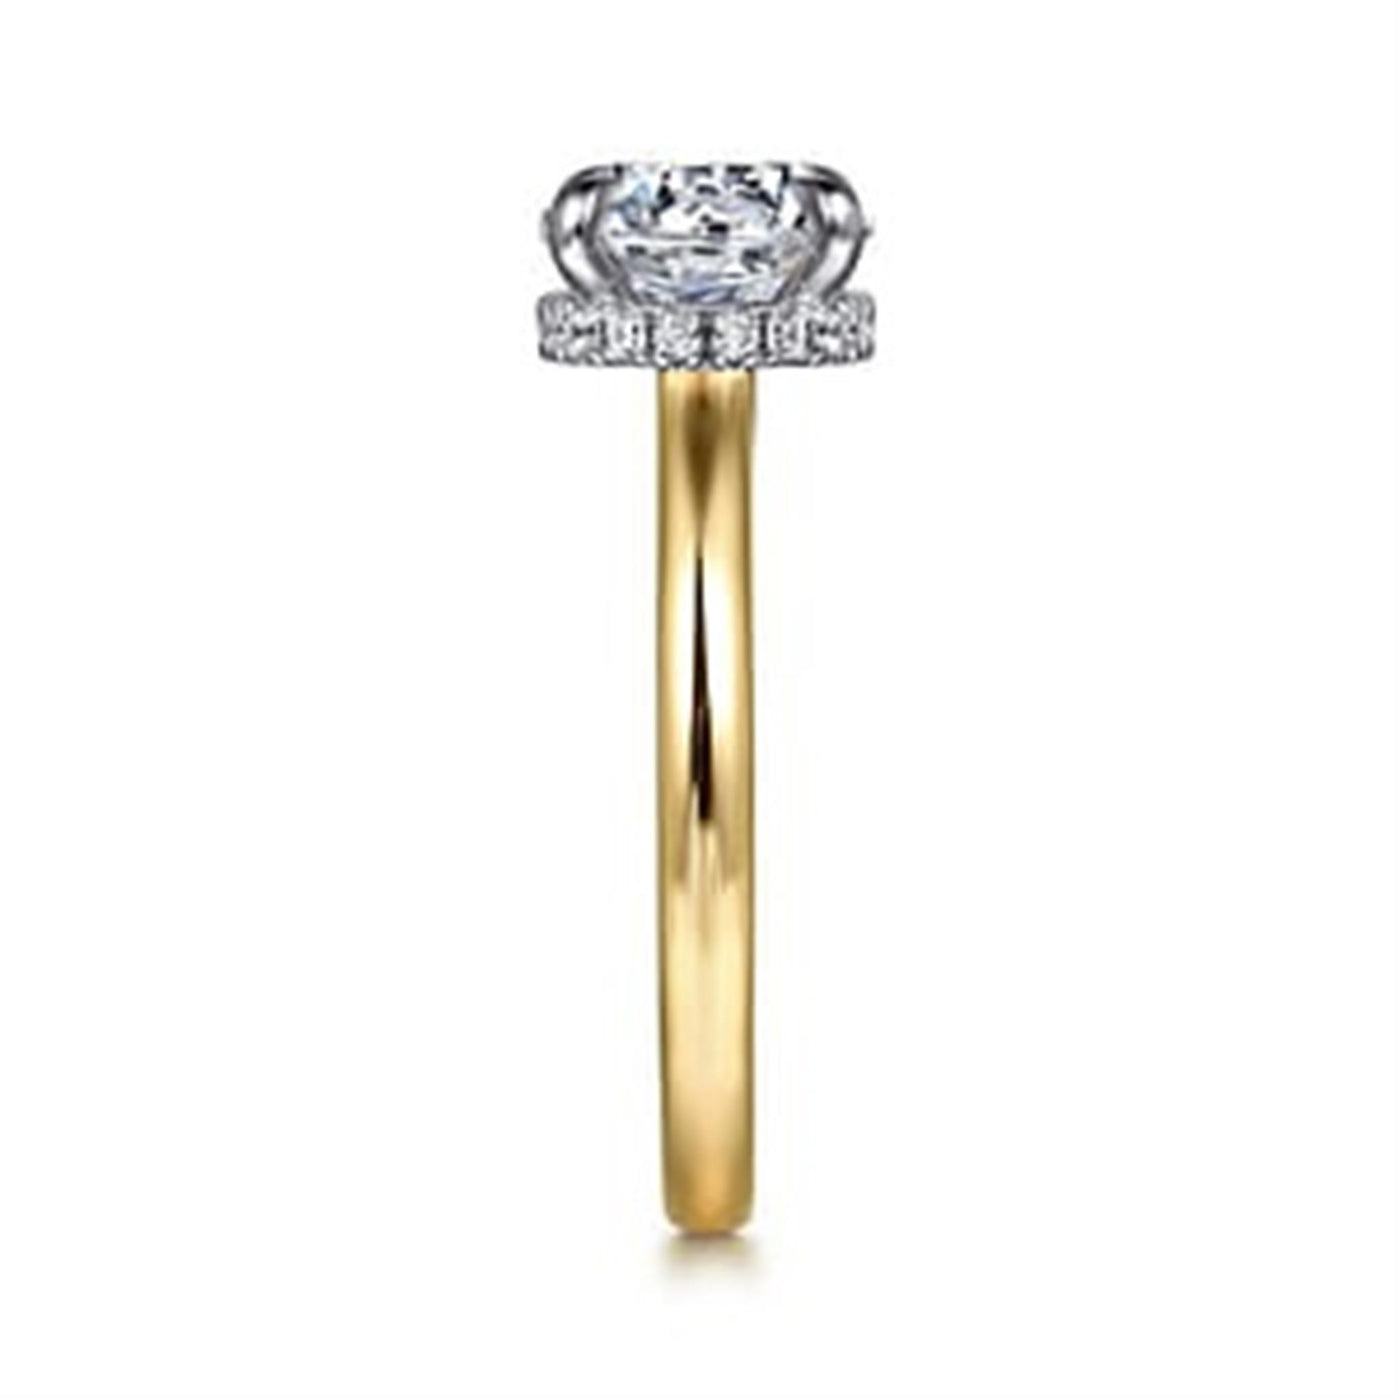 Gabriel - Classic Collection 14K White & Yellow Gold 0.11ctw 4 Prong Style Diamond Semi-Mount Engagement Ring